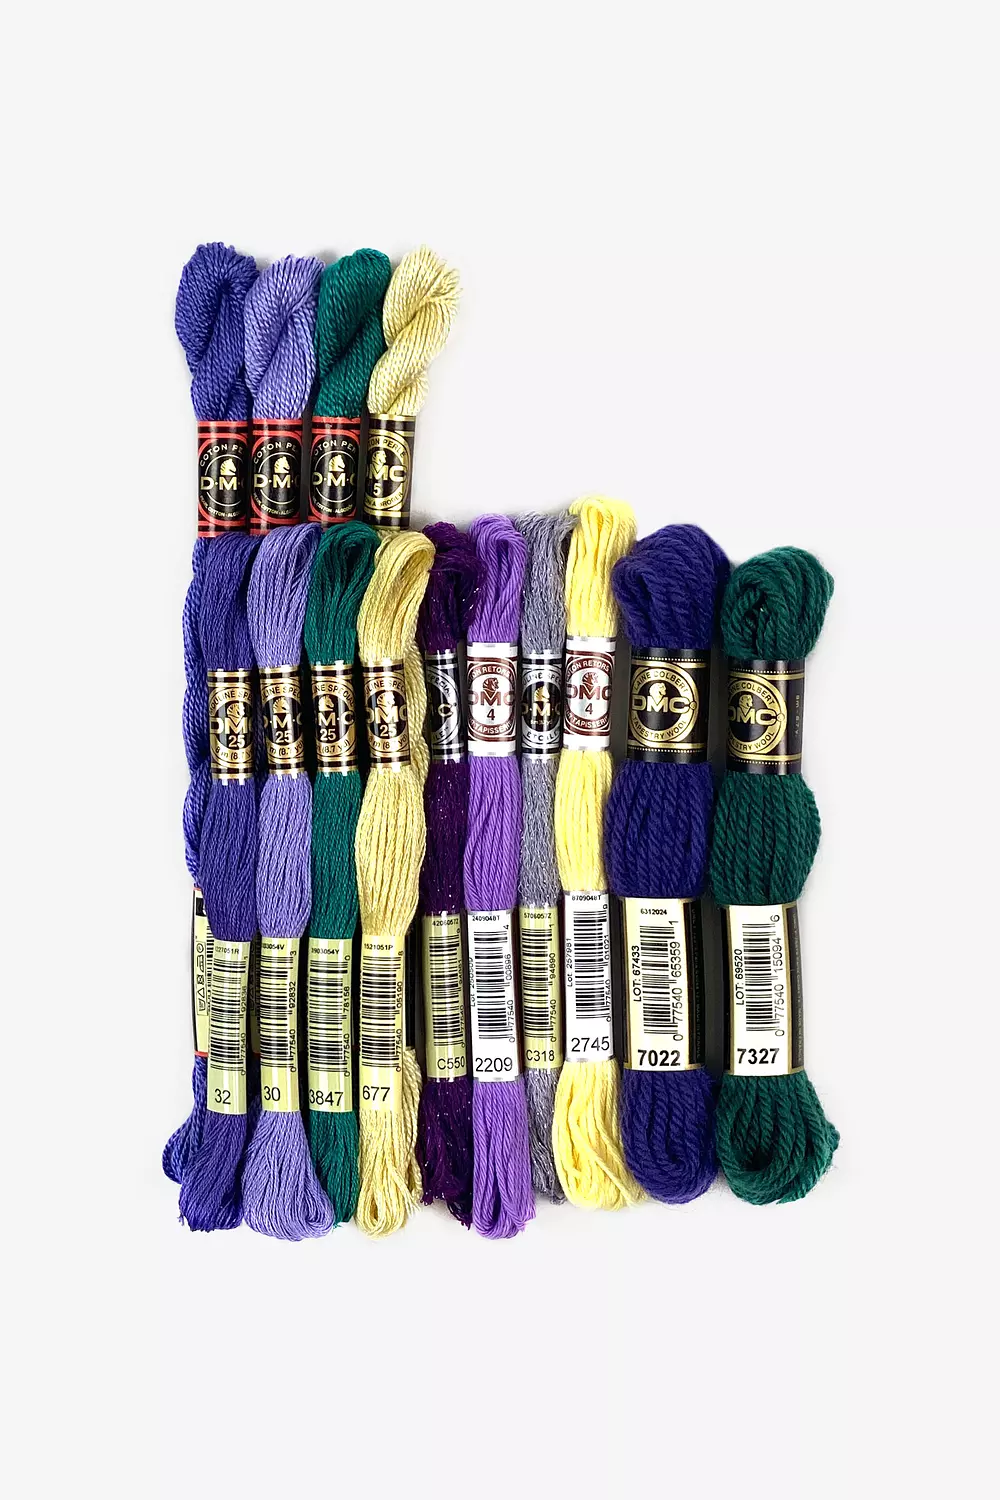 PURPLE Embroidery Floss Set DMC Embroidery Thread Collection Floss